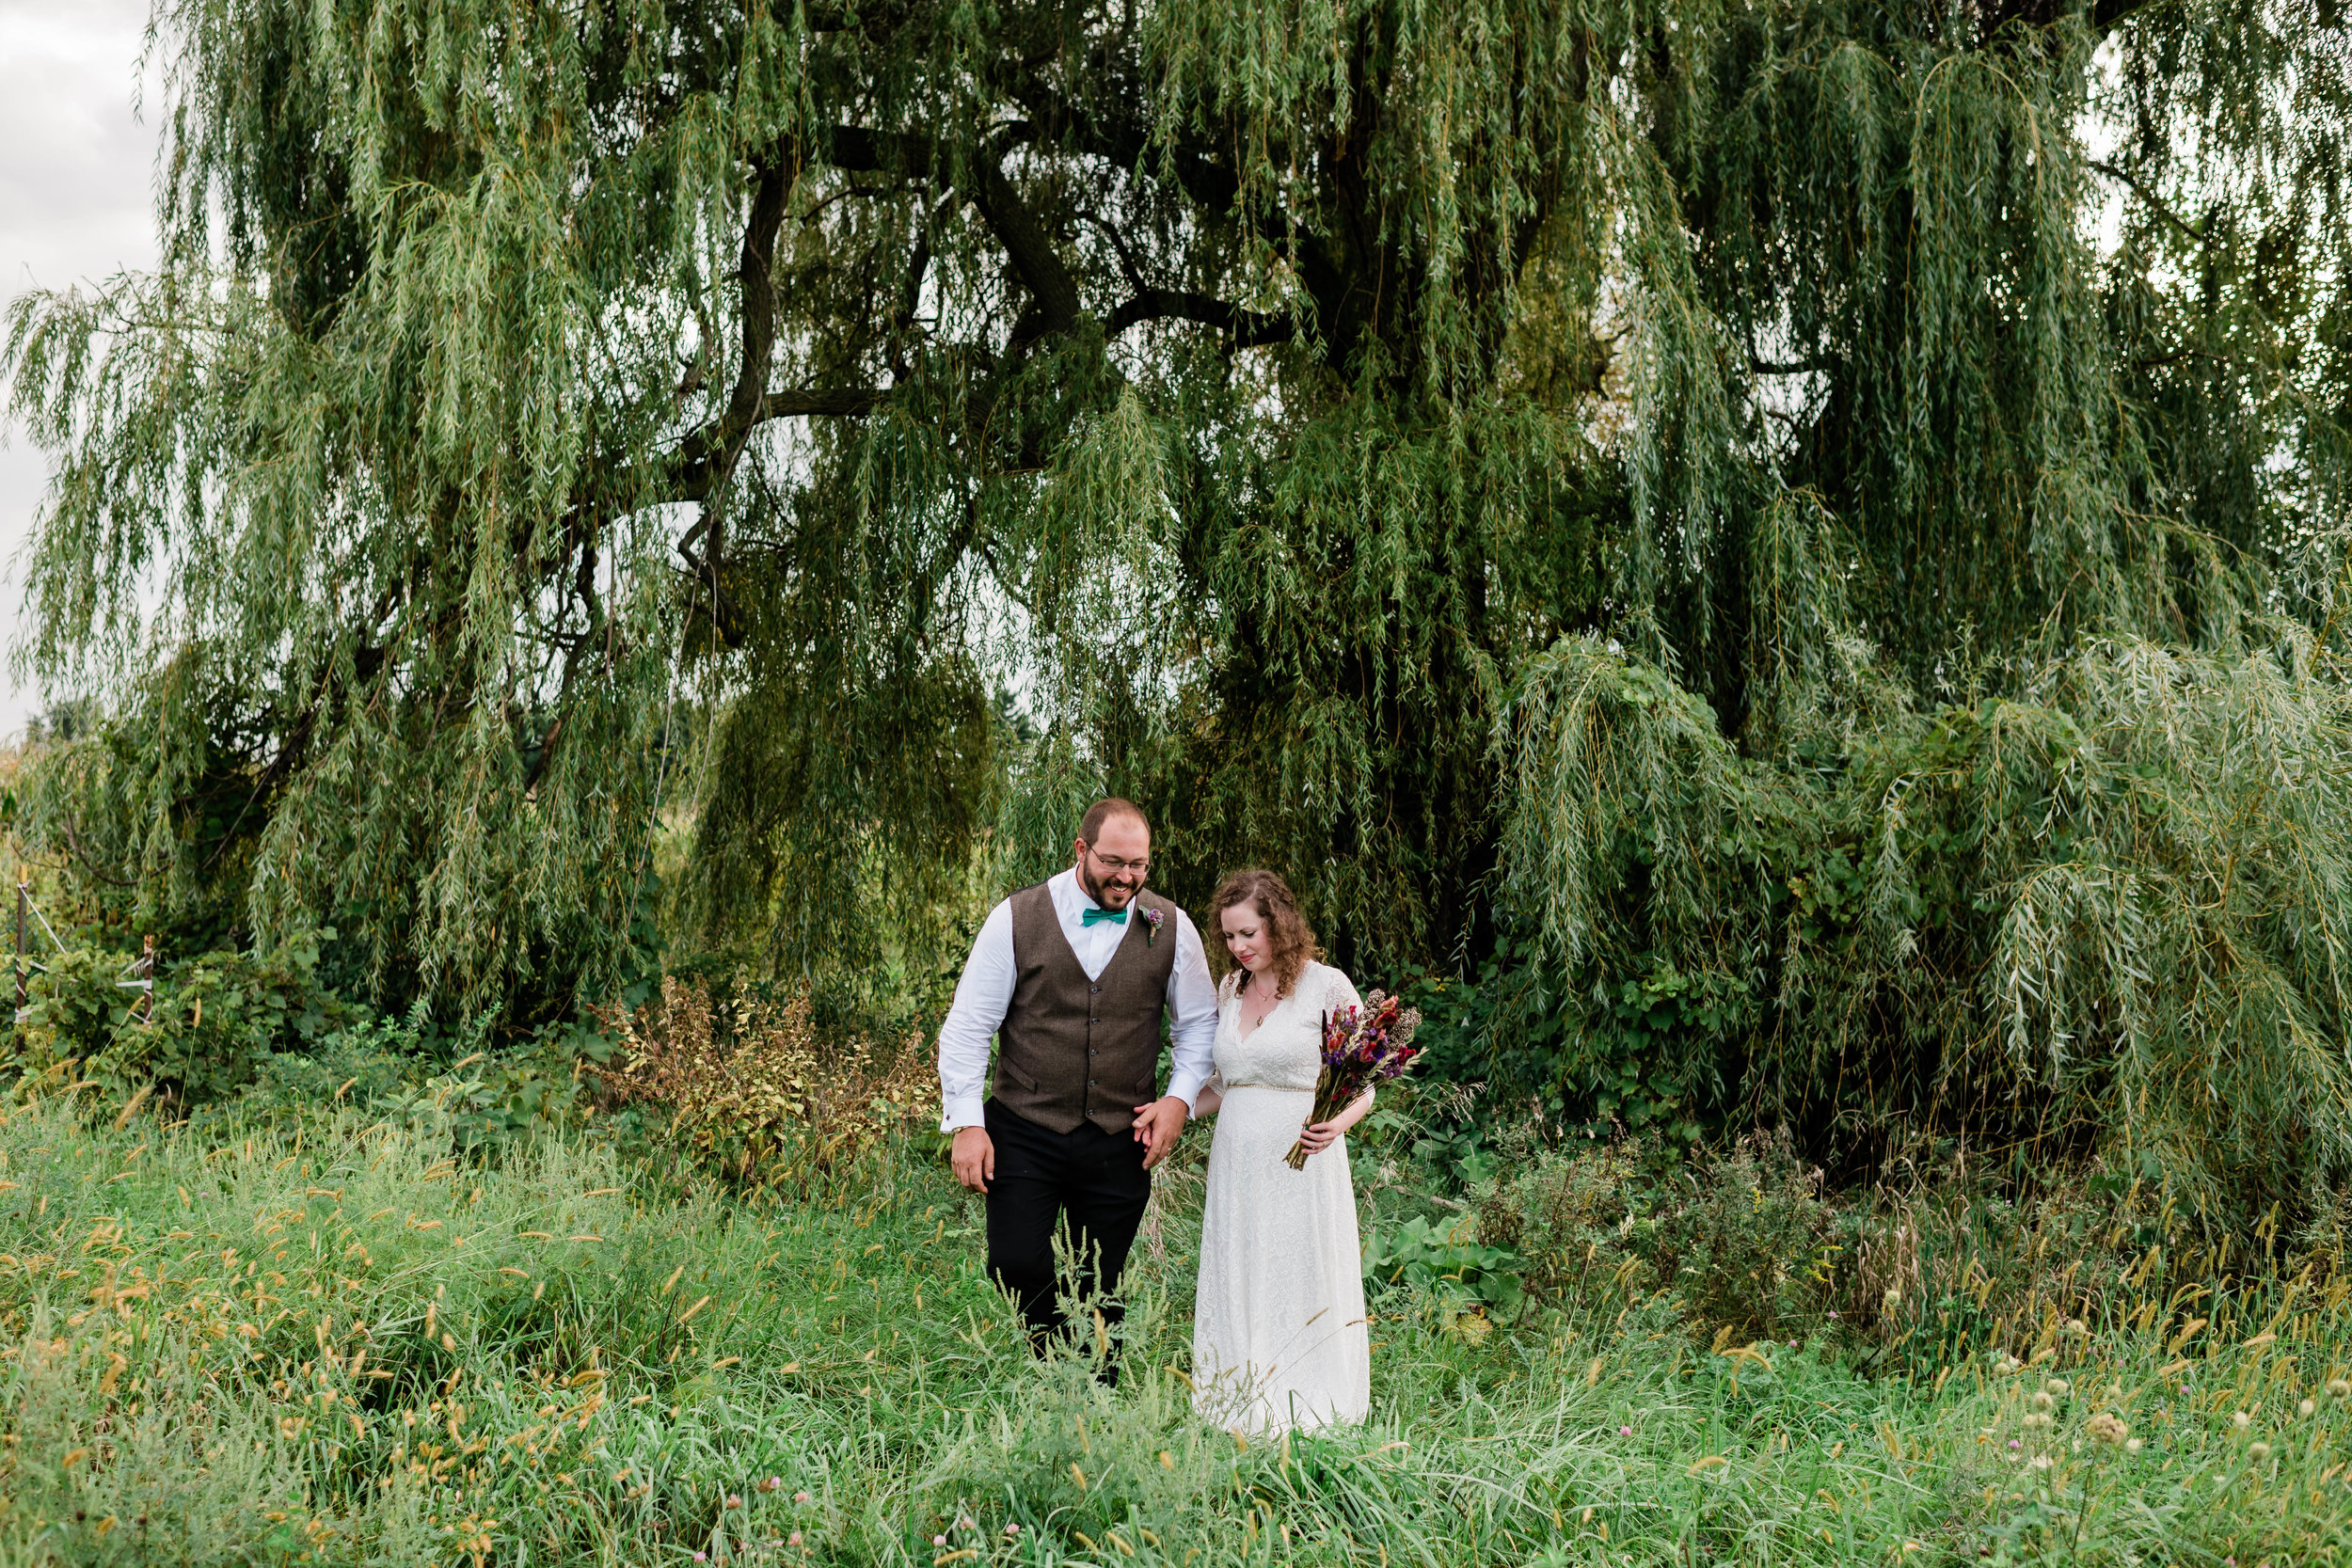 Bride and groom walk in front of a weeping willow tree